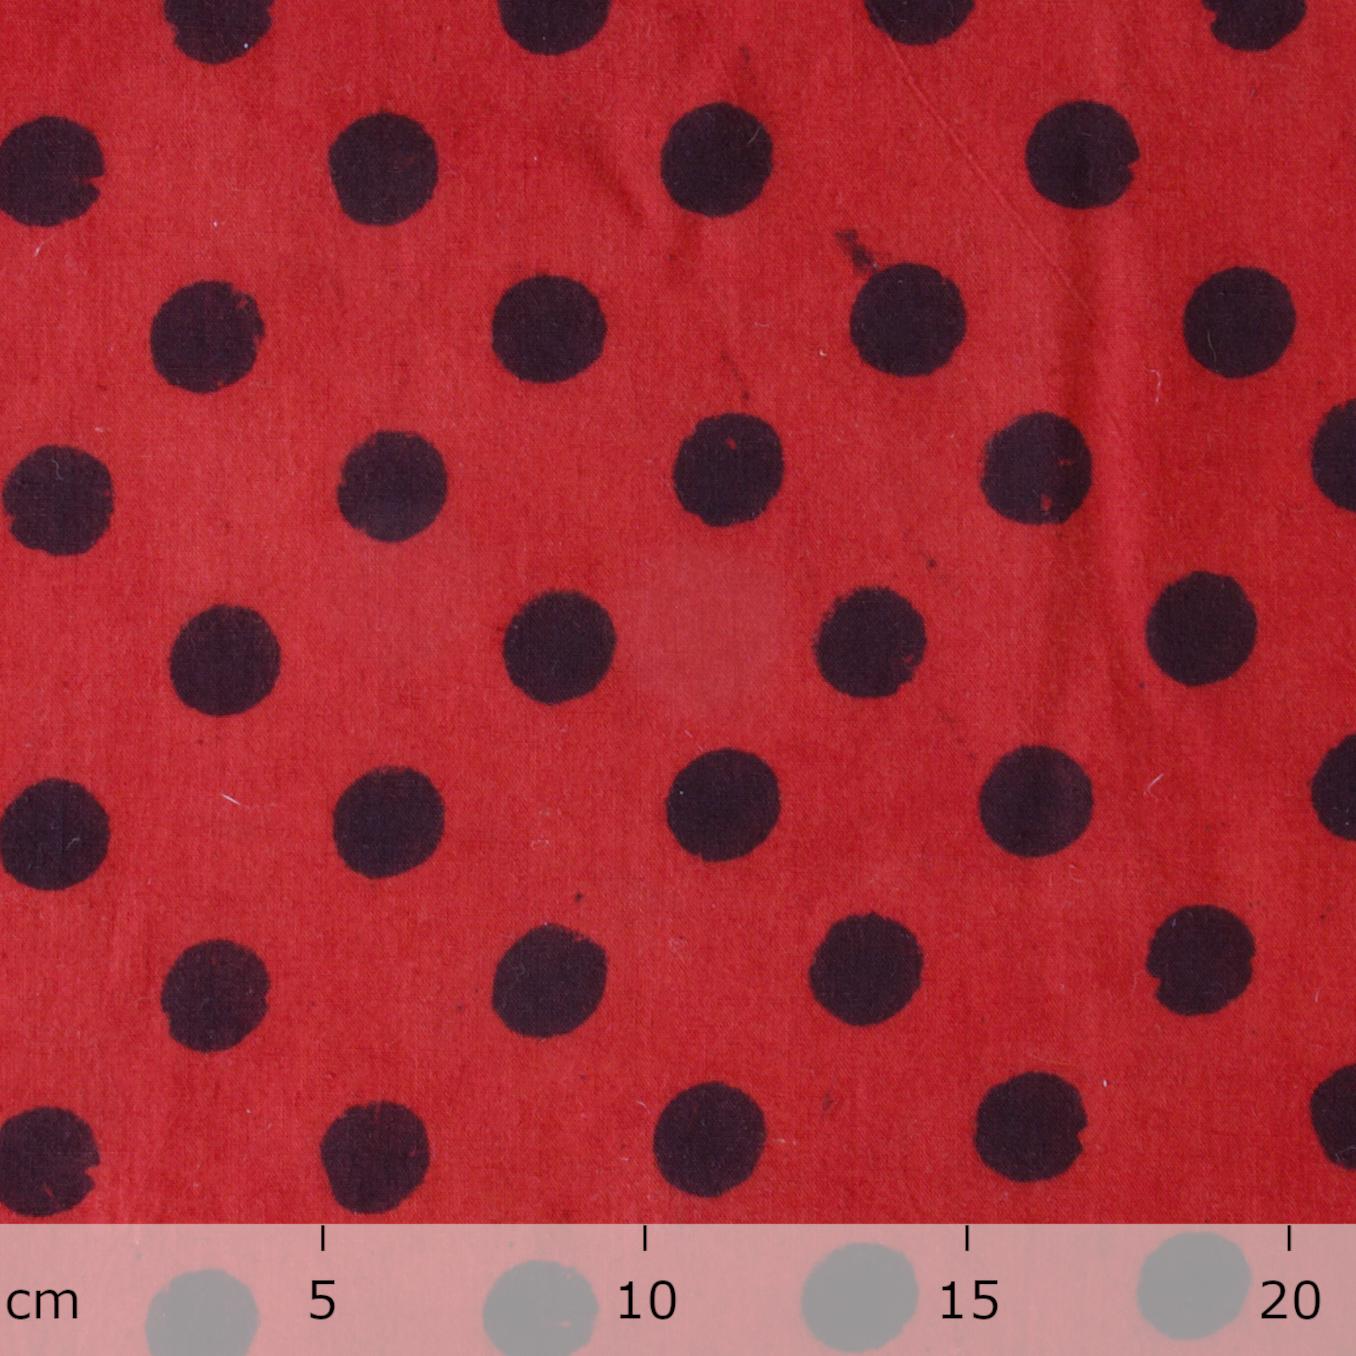 AHM16 - Block-Printed Cotton Fabric From India - Dots Motif - Black Iron and Red Alizarin Dye - Ruler - Live